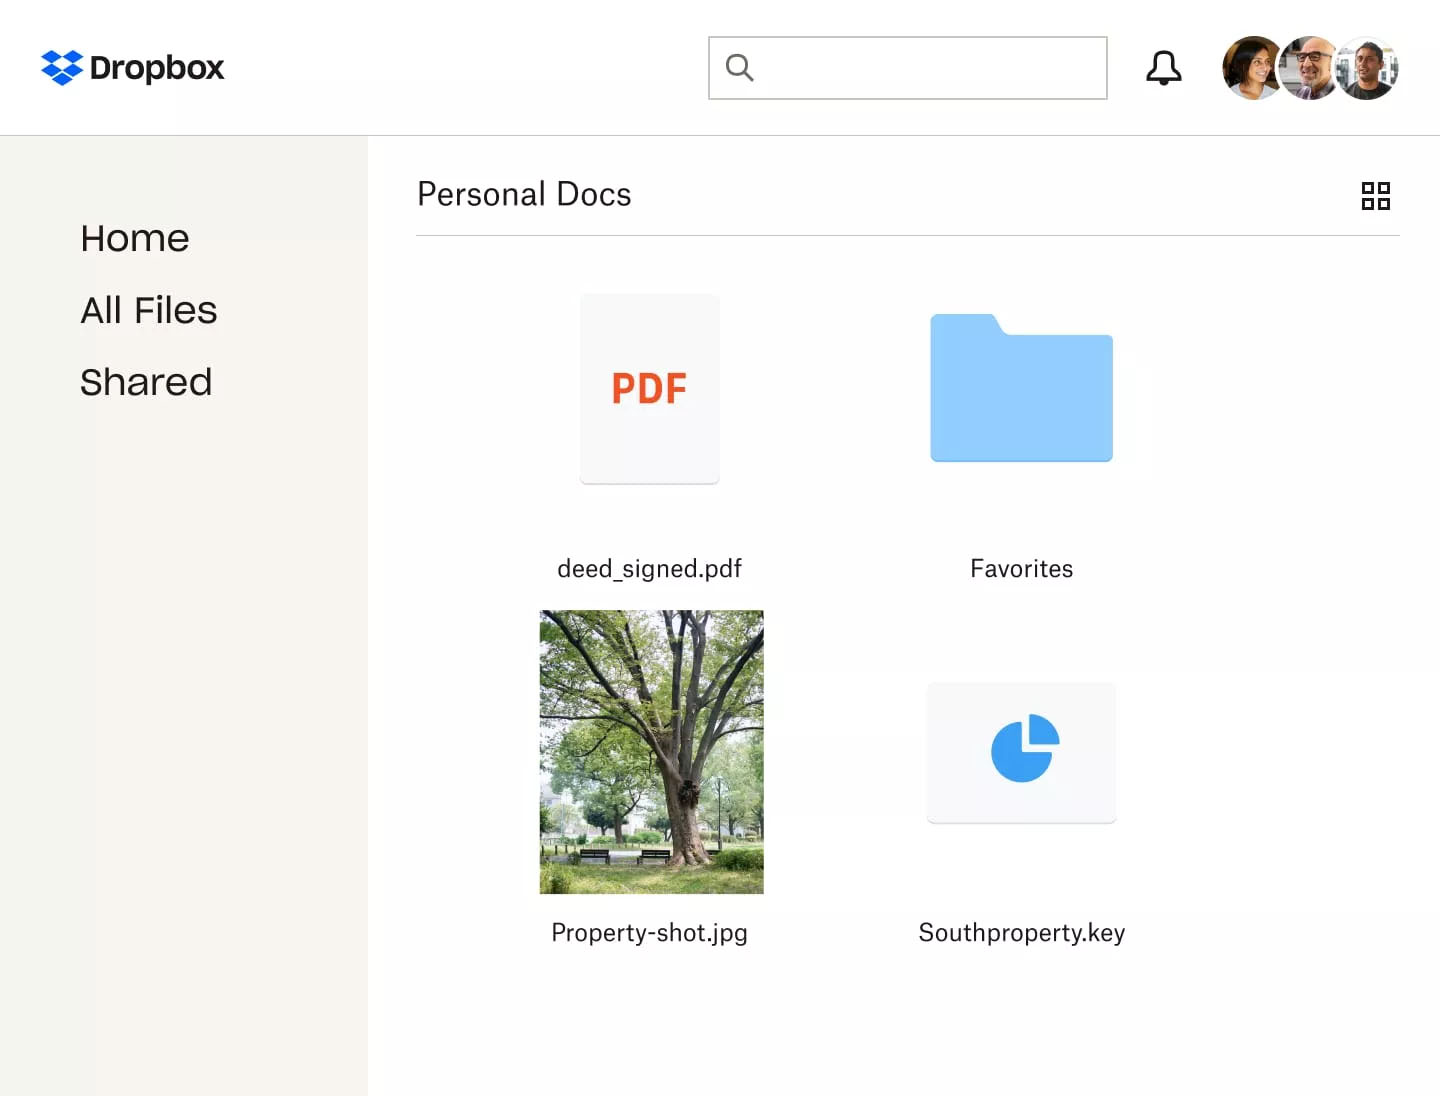 Dropbox interface showing the main menu at the left panel and "Personal Docs" in the main panel.